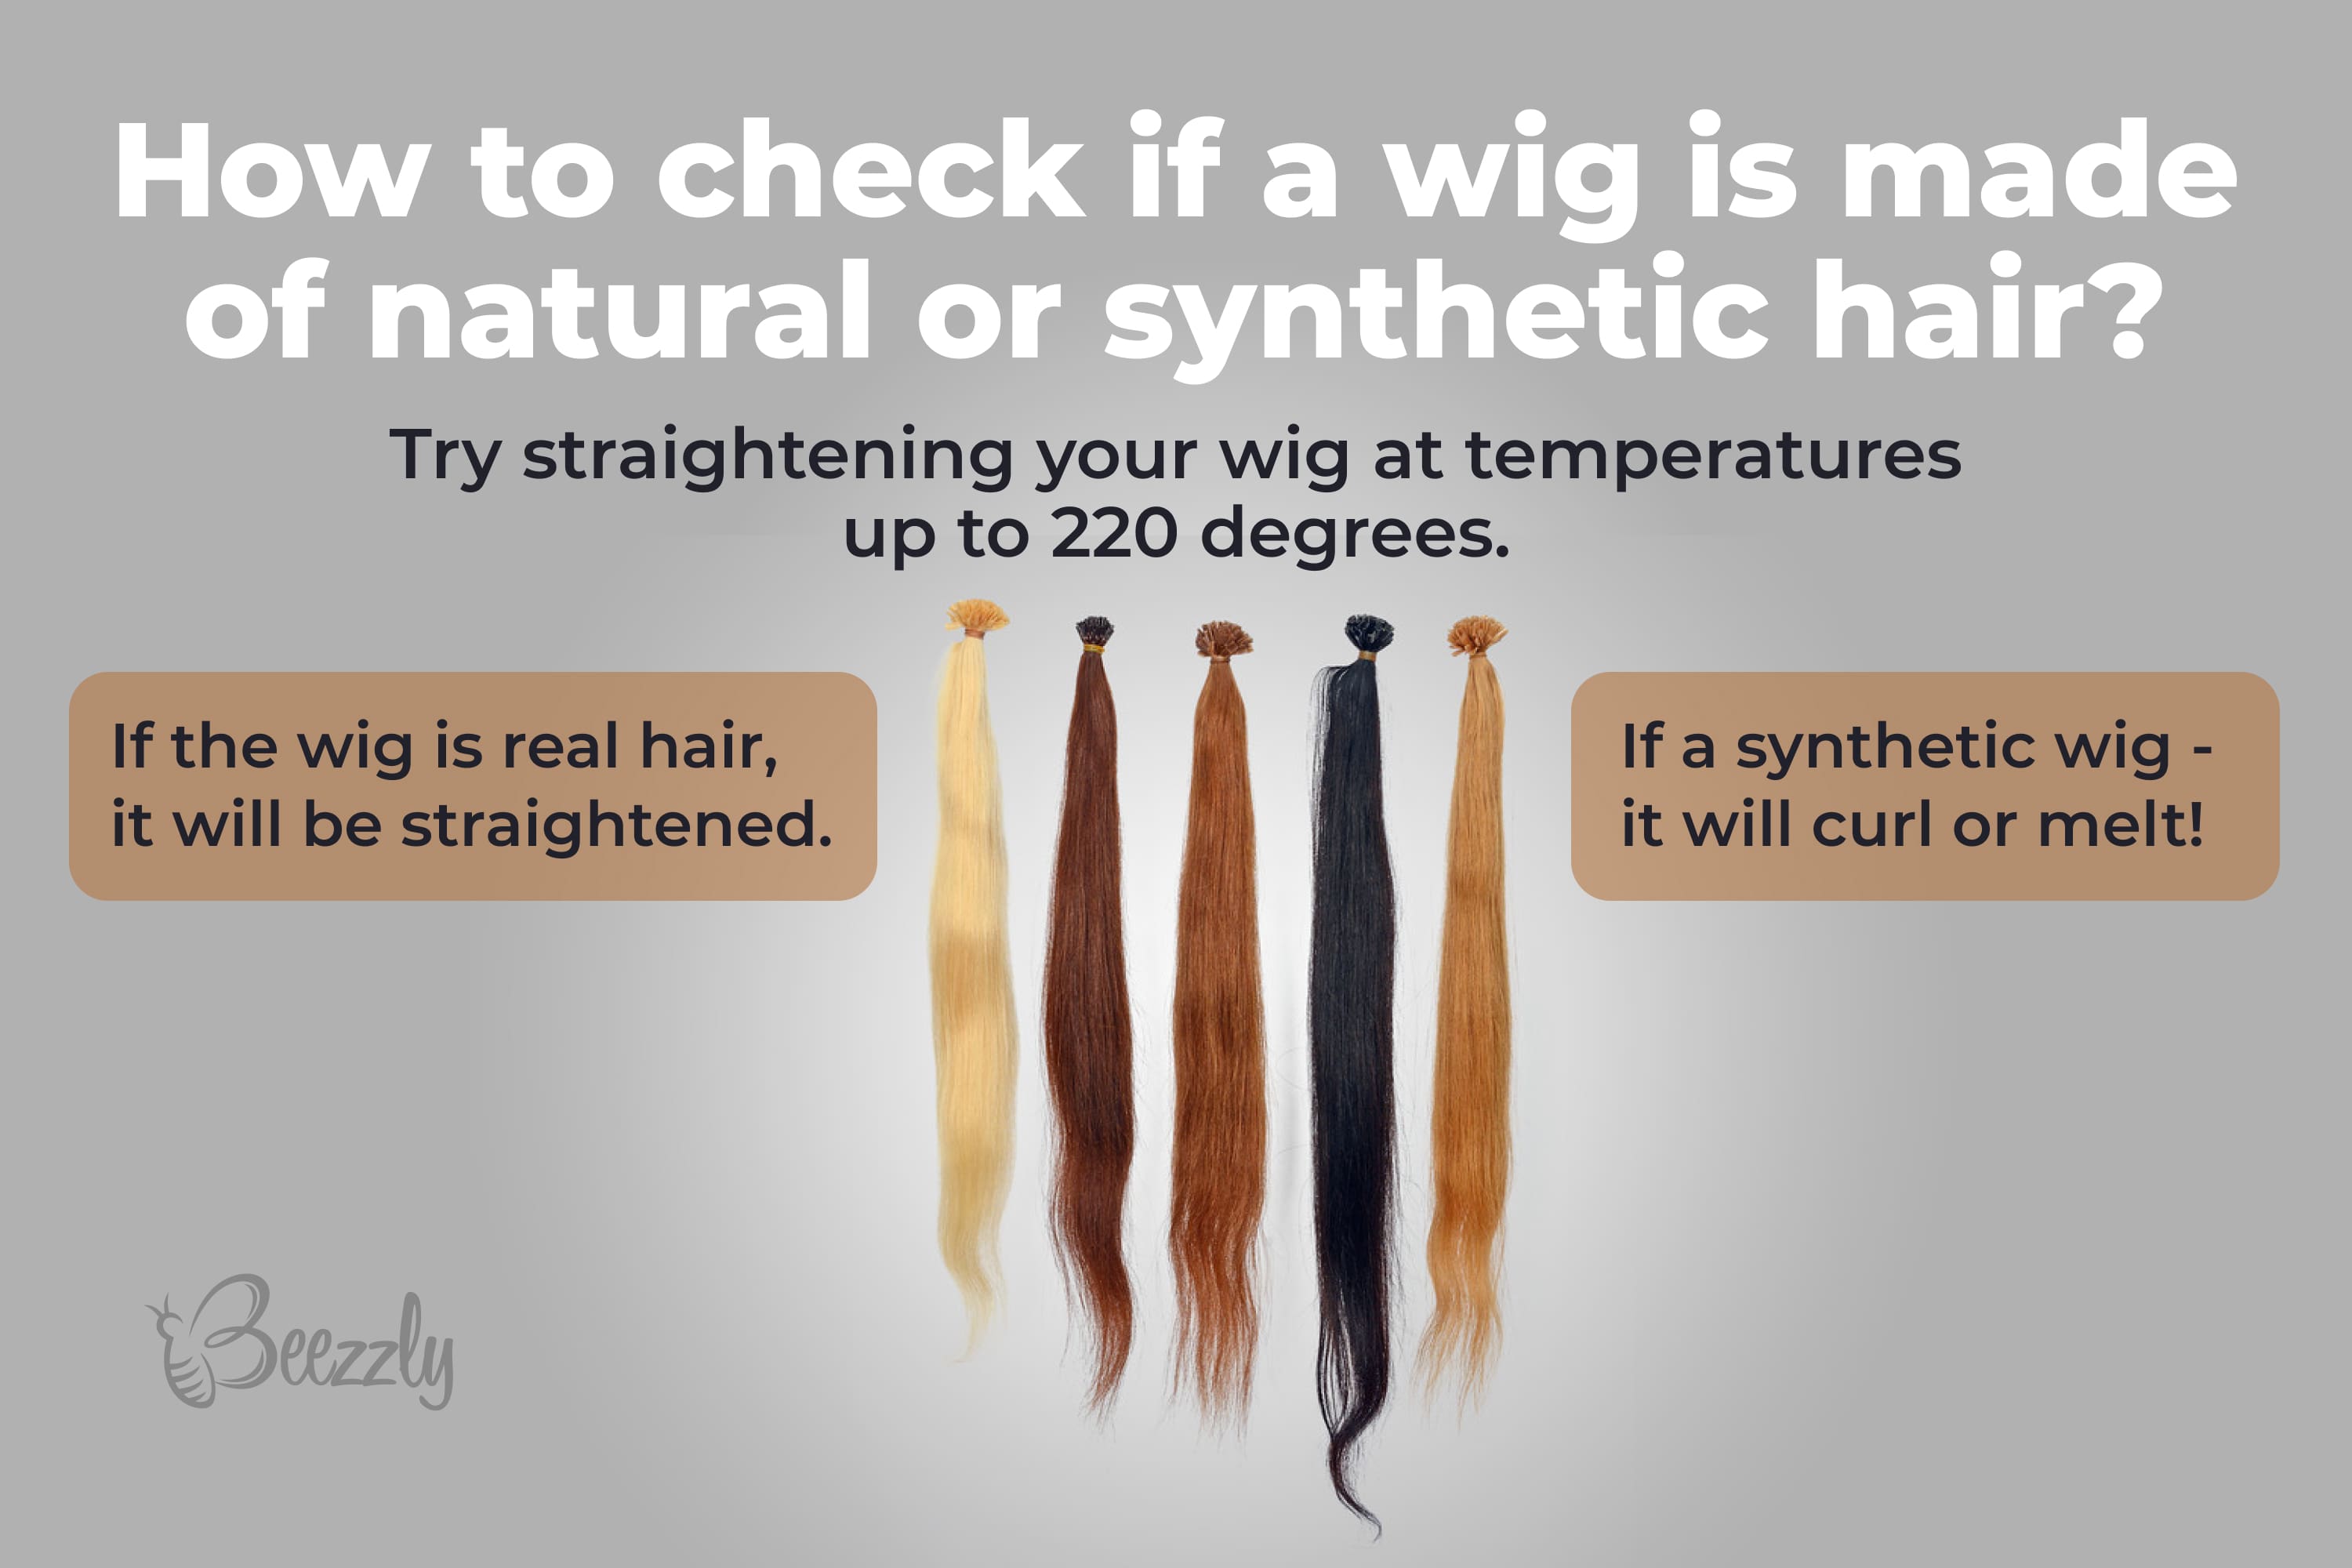 How to check if a wig is made of natural or synthetic hair